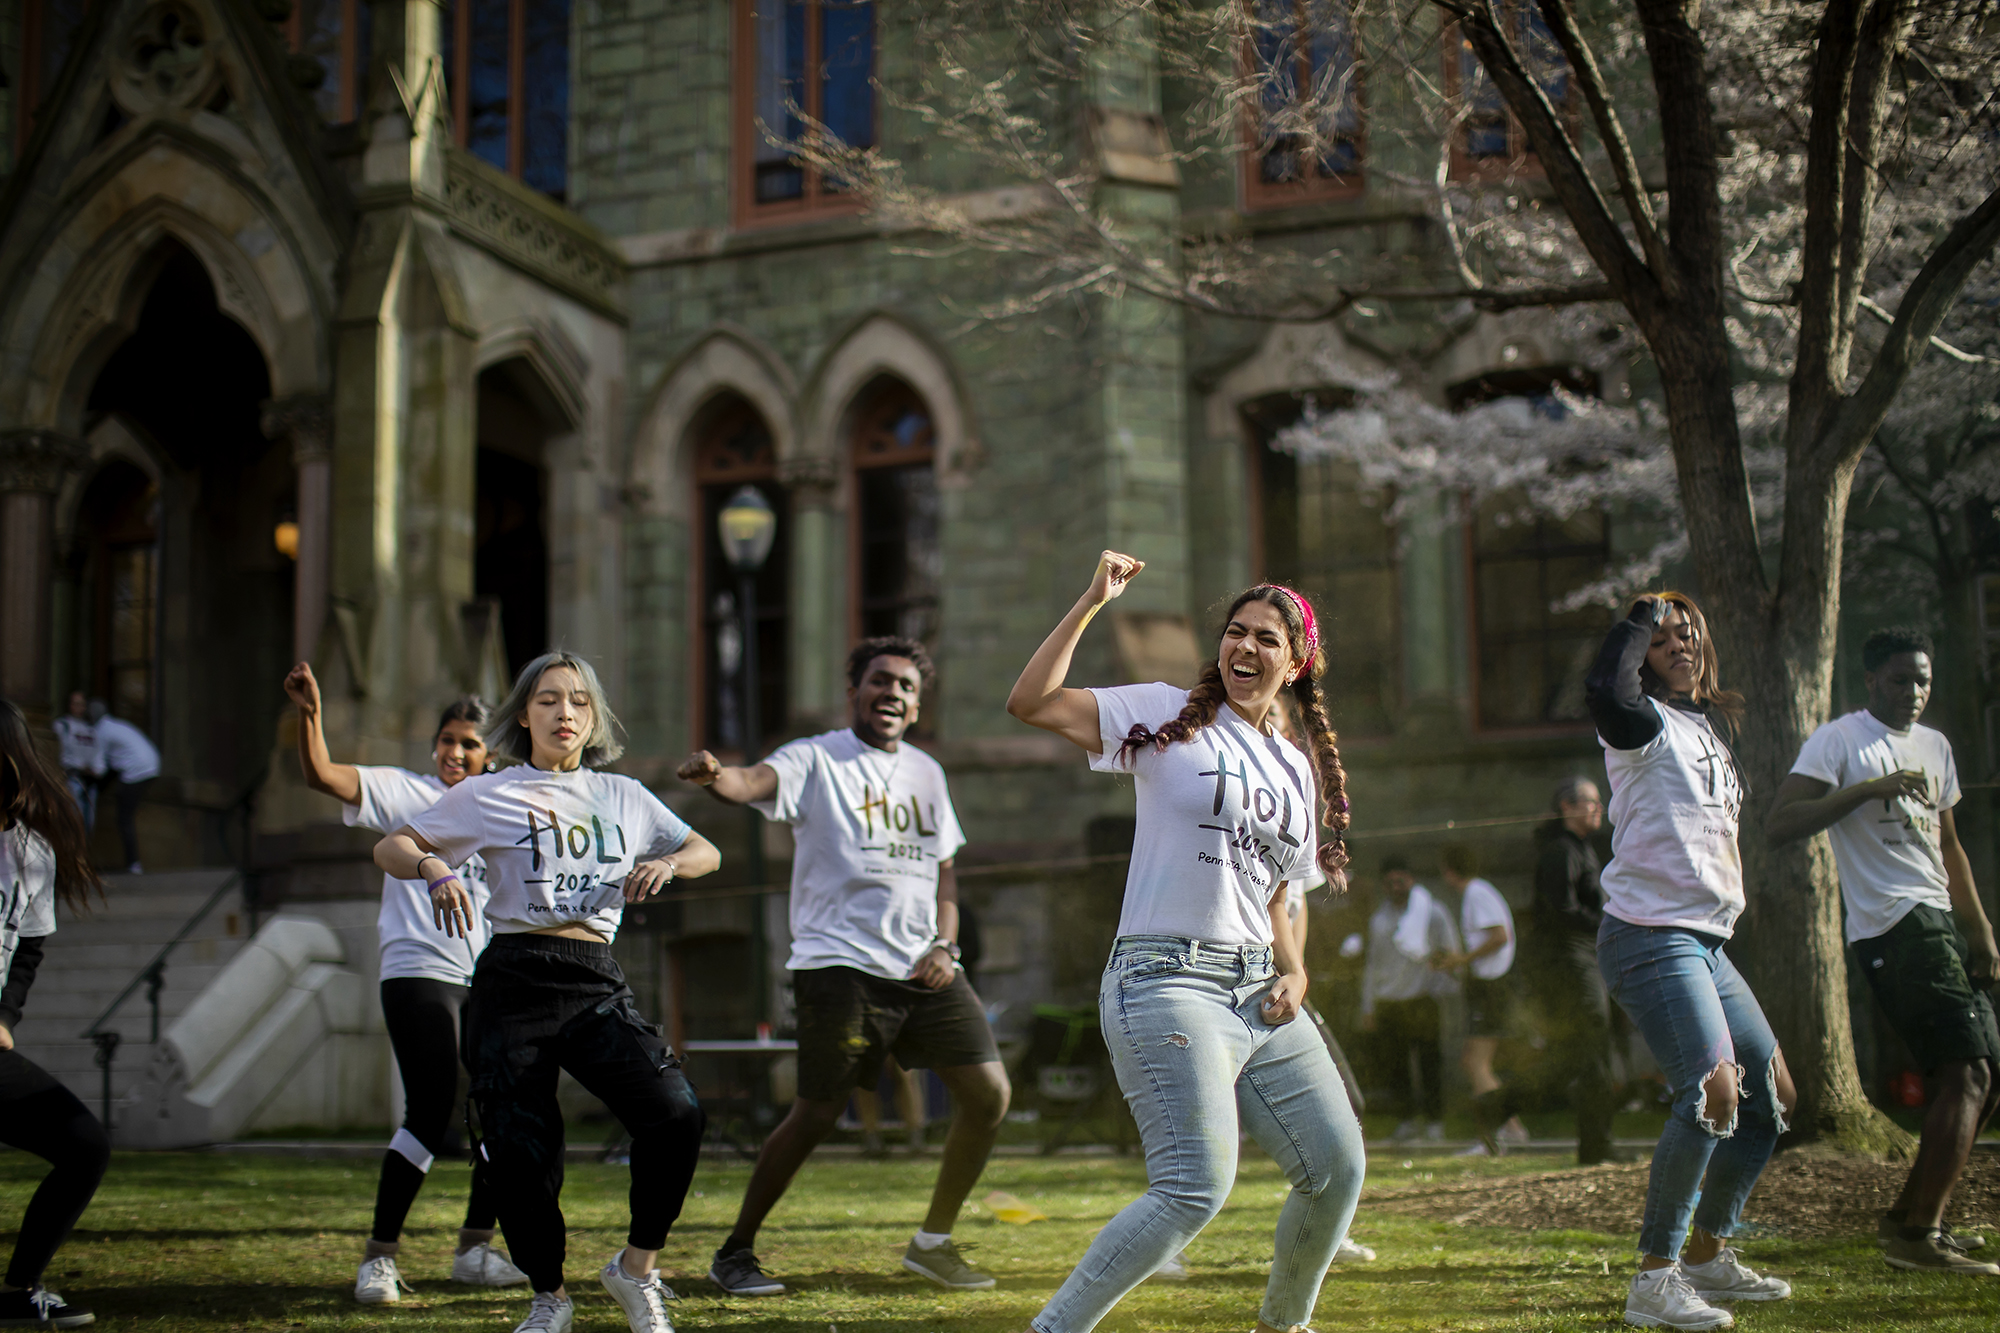 Six performers dancing in front of College Hall for Penn’s Holi celebration.